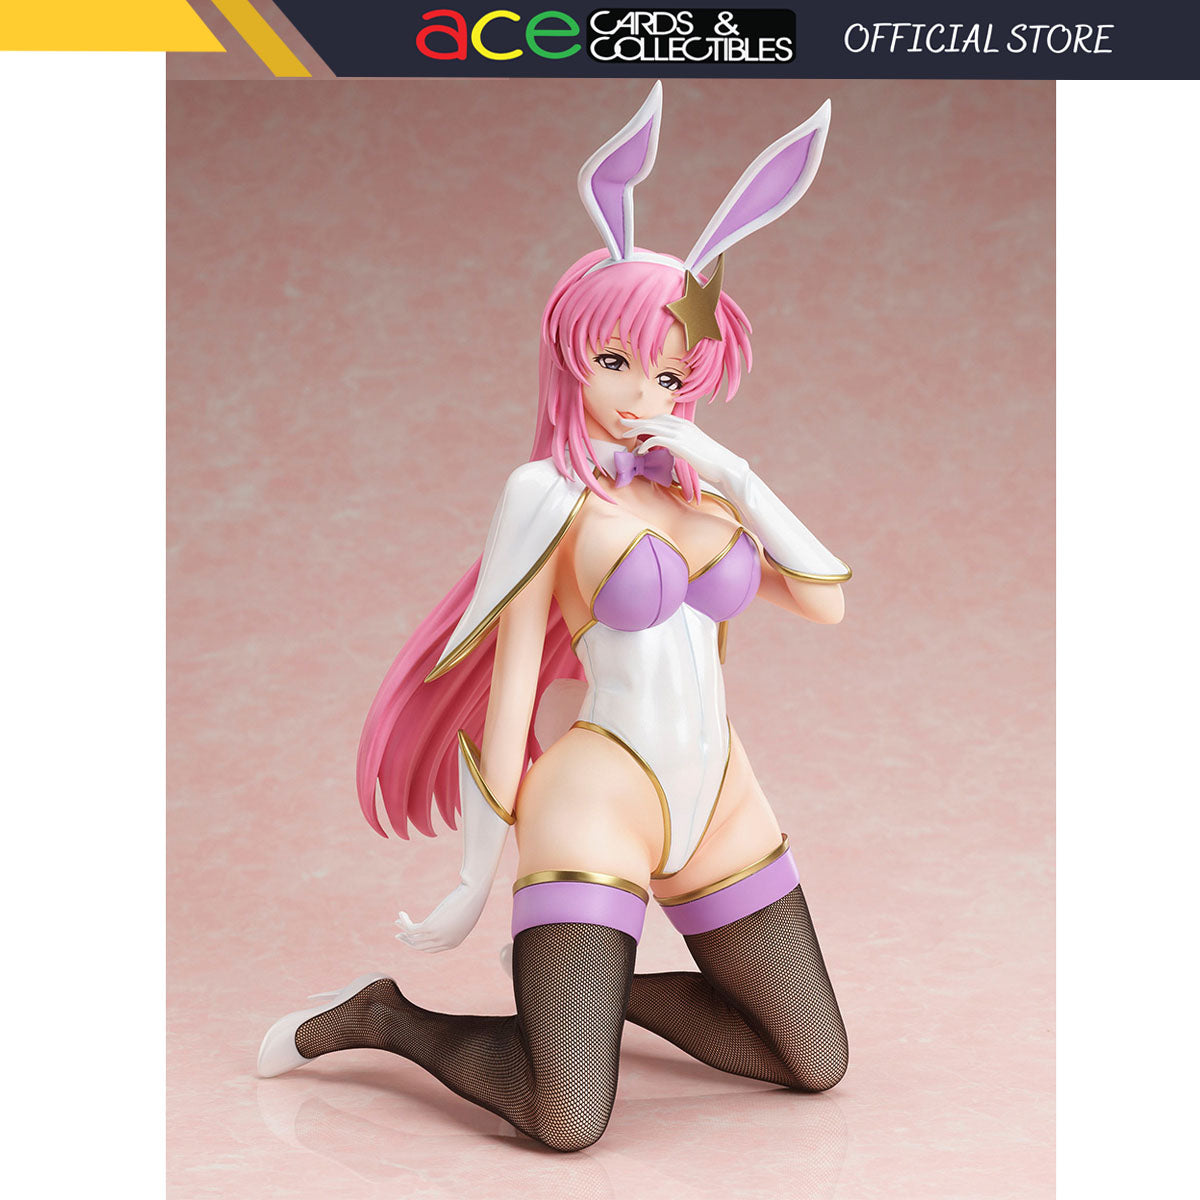 Mobile Suit Gundam Seed Destiny: B-STYLE "Meer Campbell" (Bunny ver.)-MegaHouse-Ace Cards & Collectibles